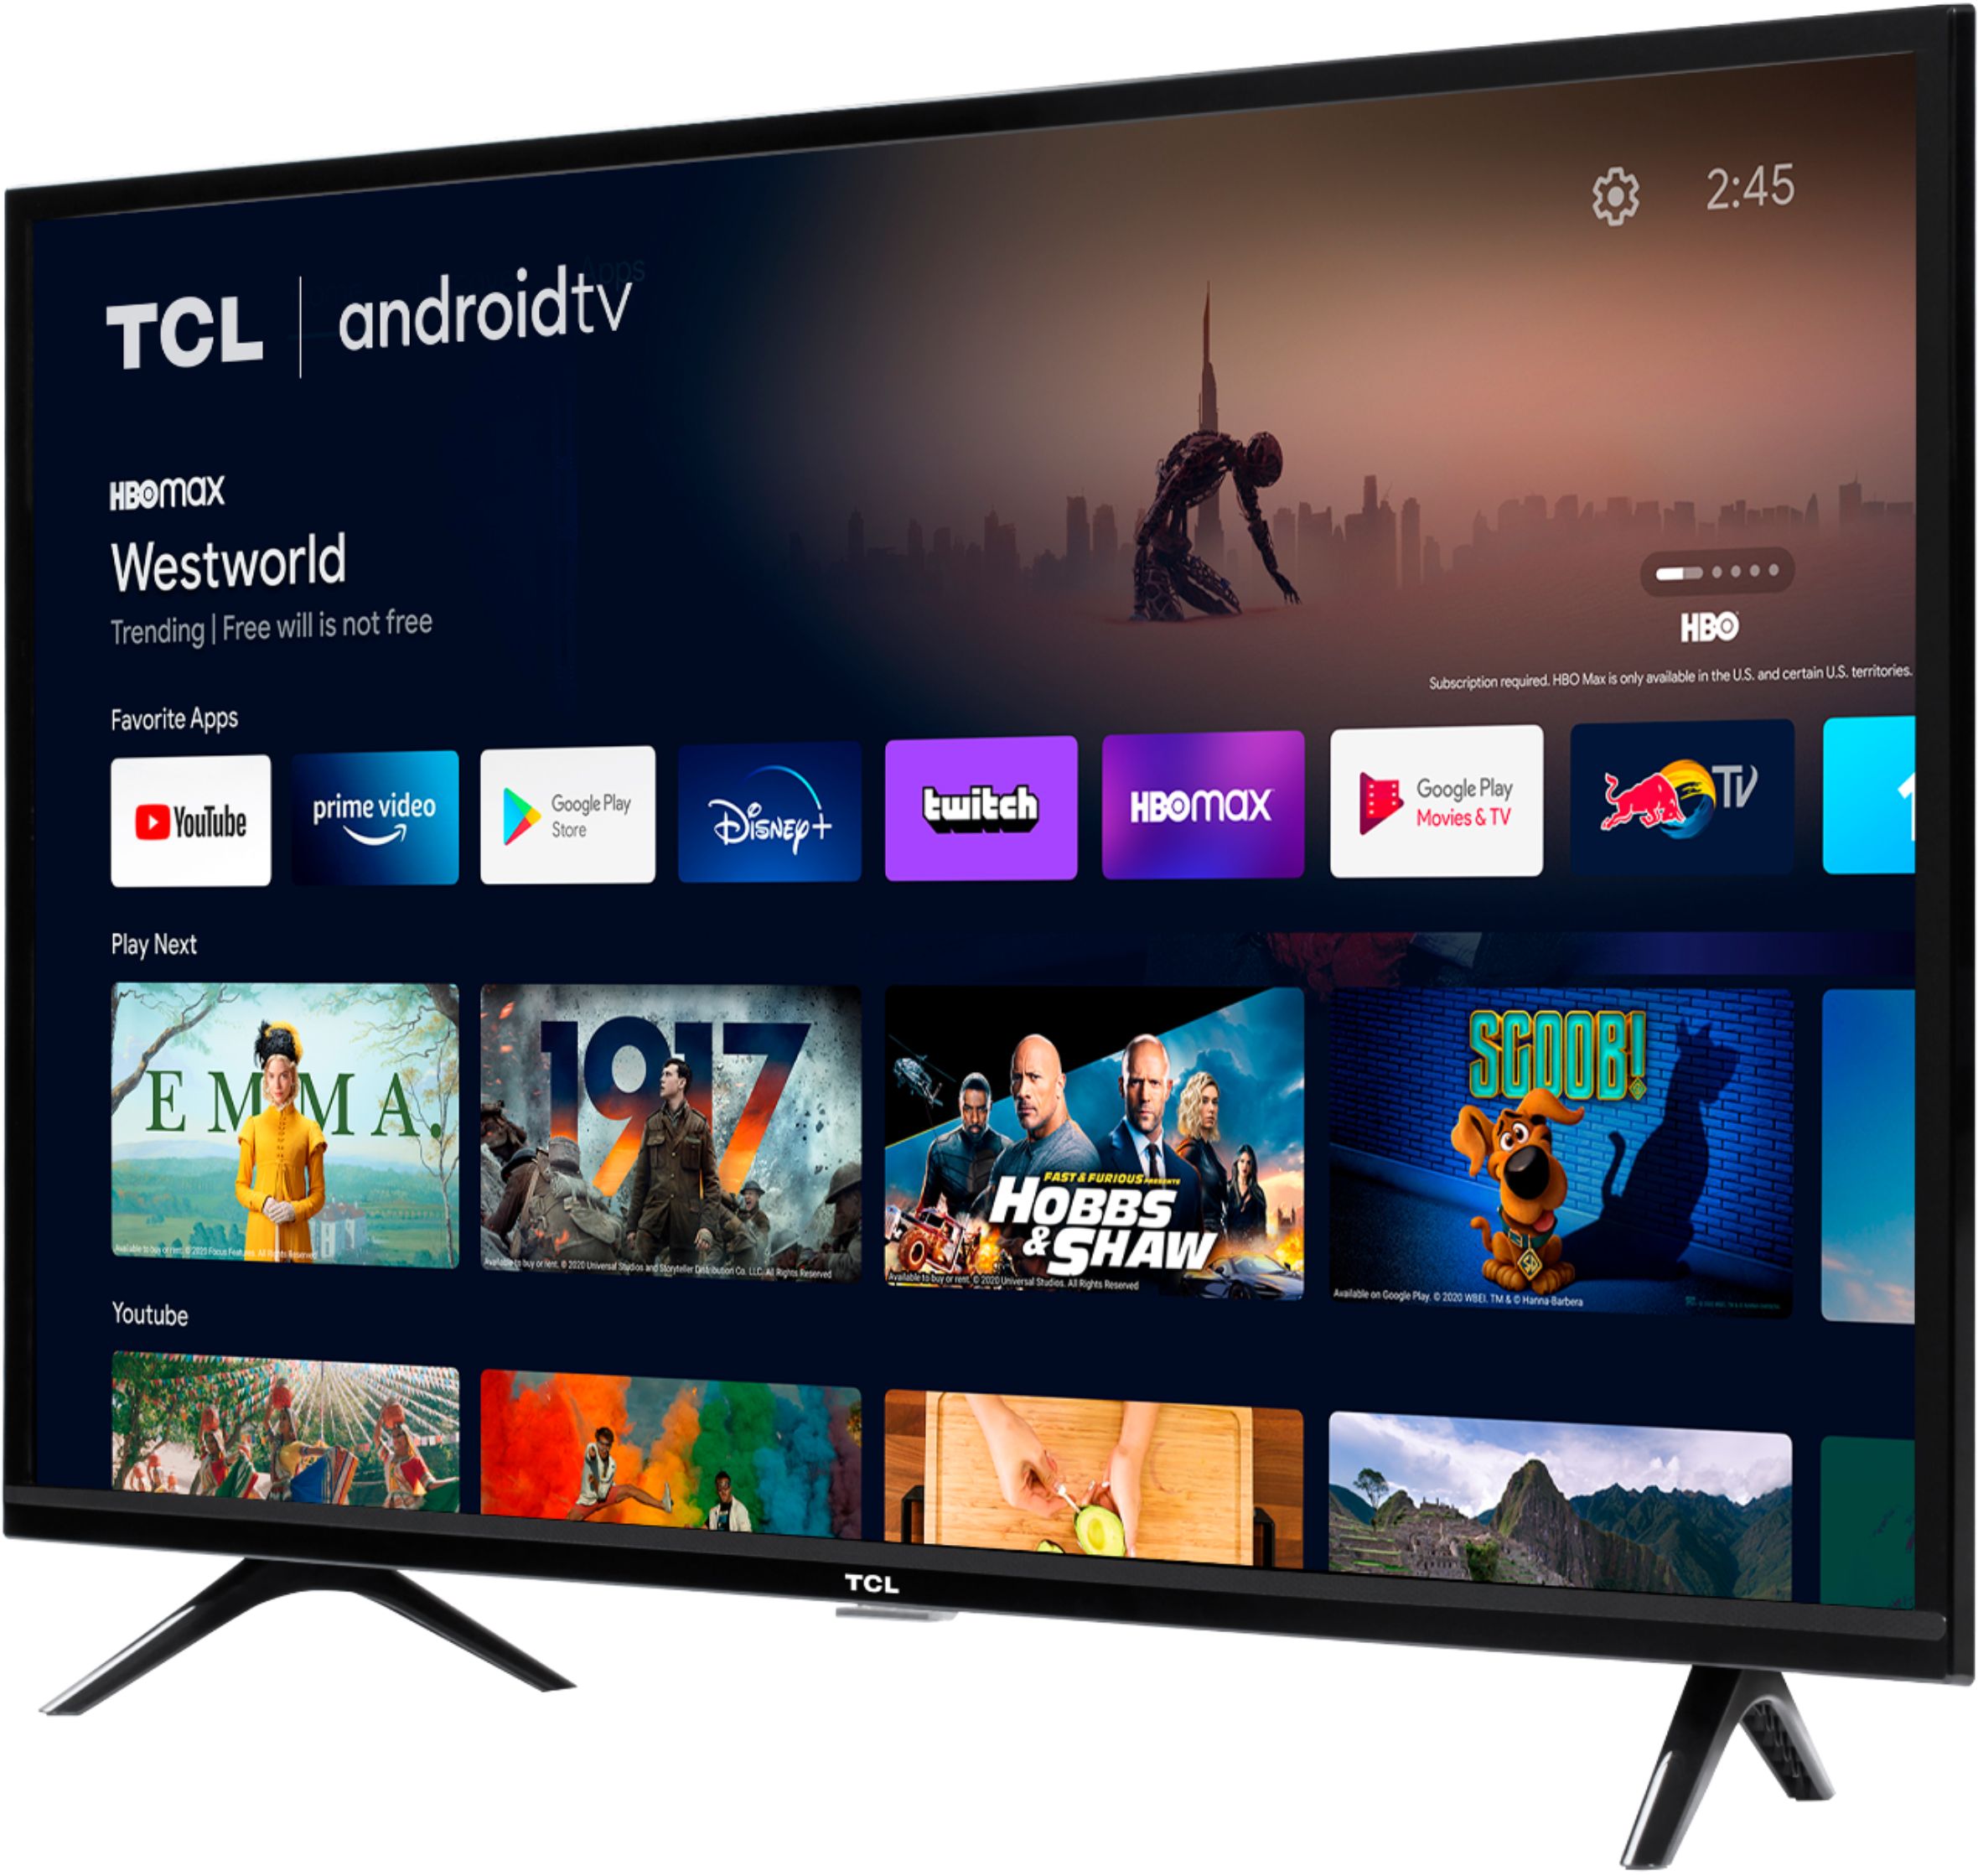 Wow! This TCL 40-inch Smart TV is at its lowest price ever